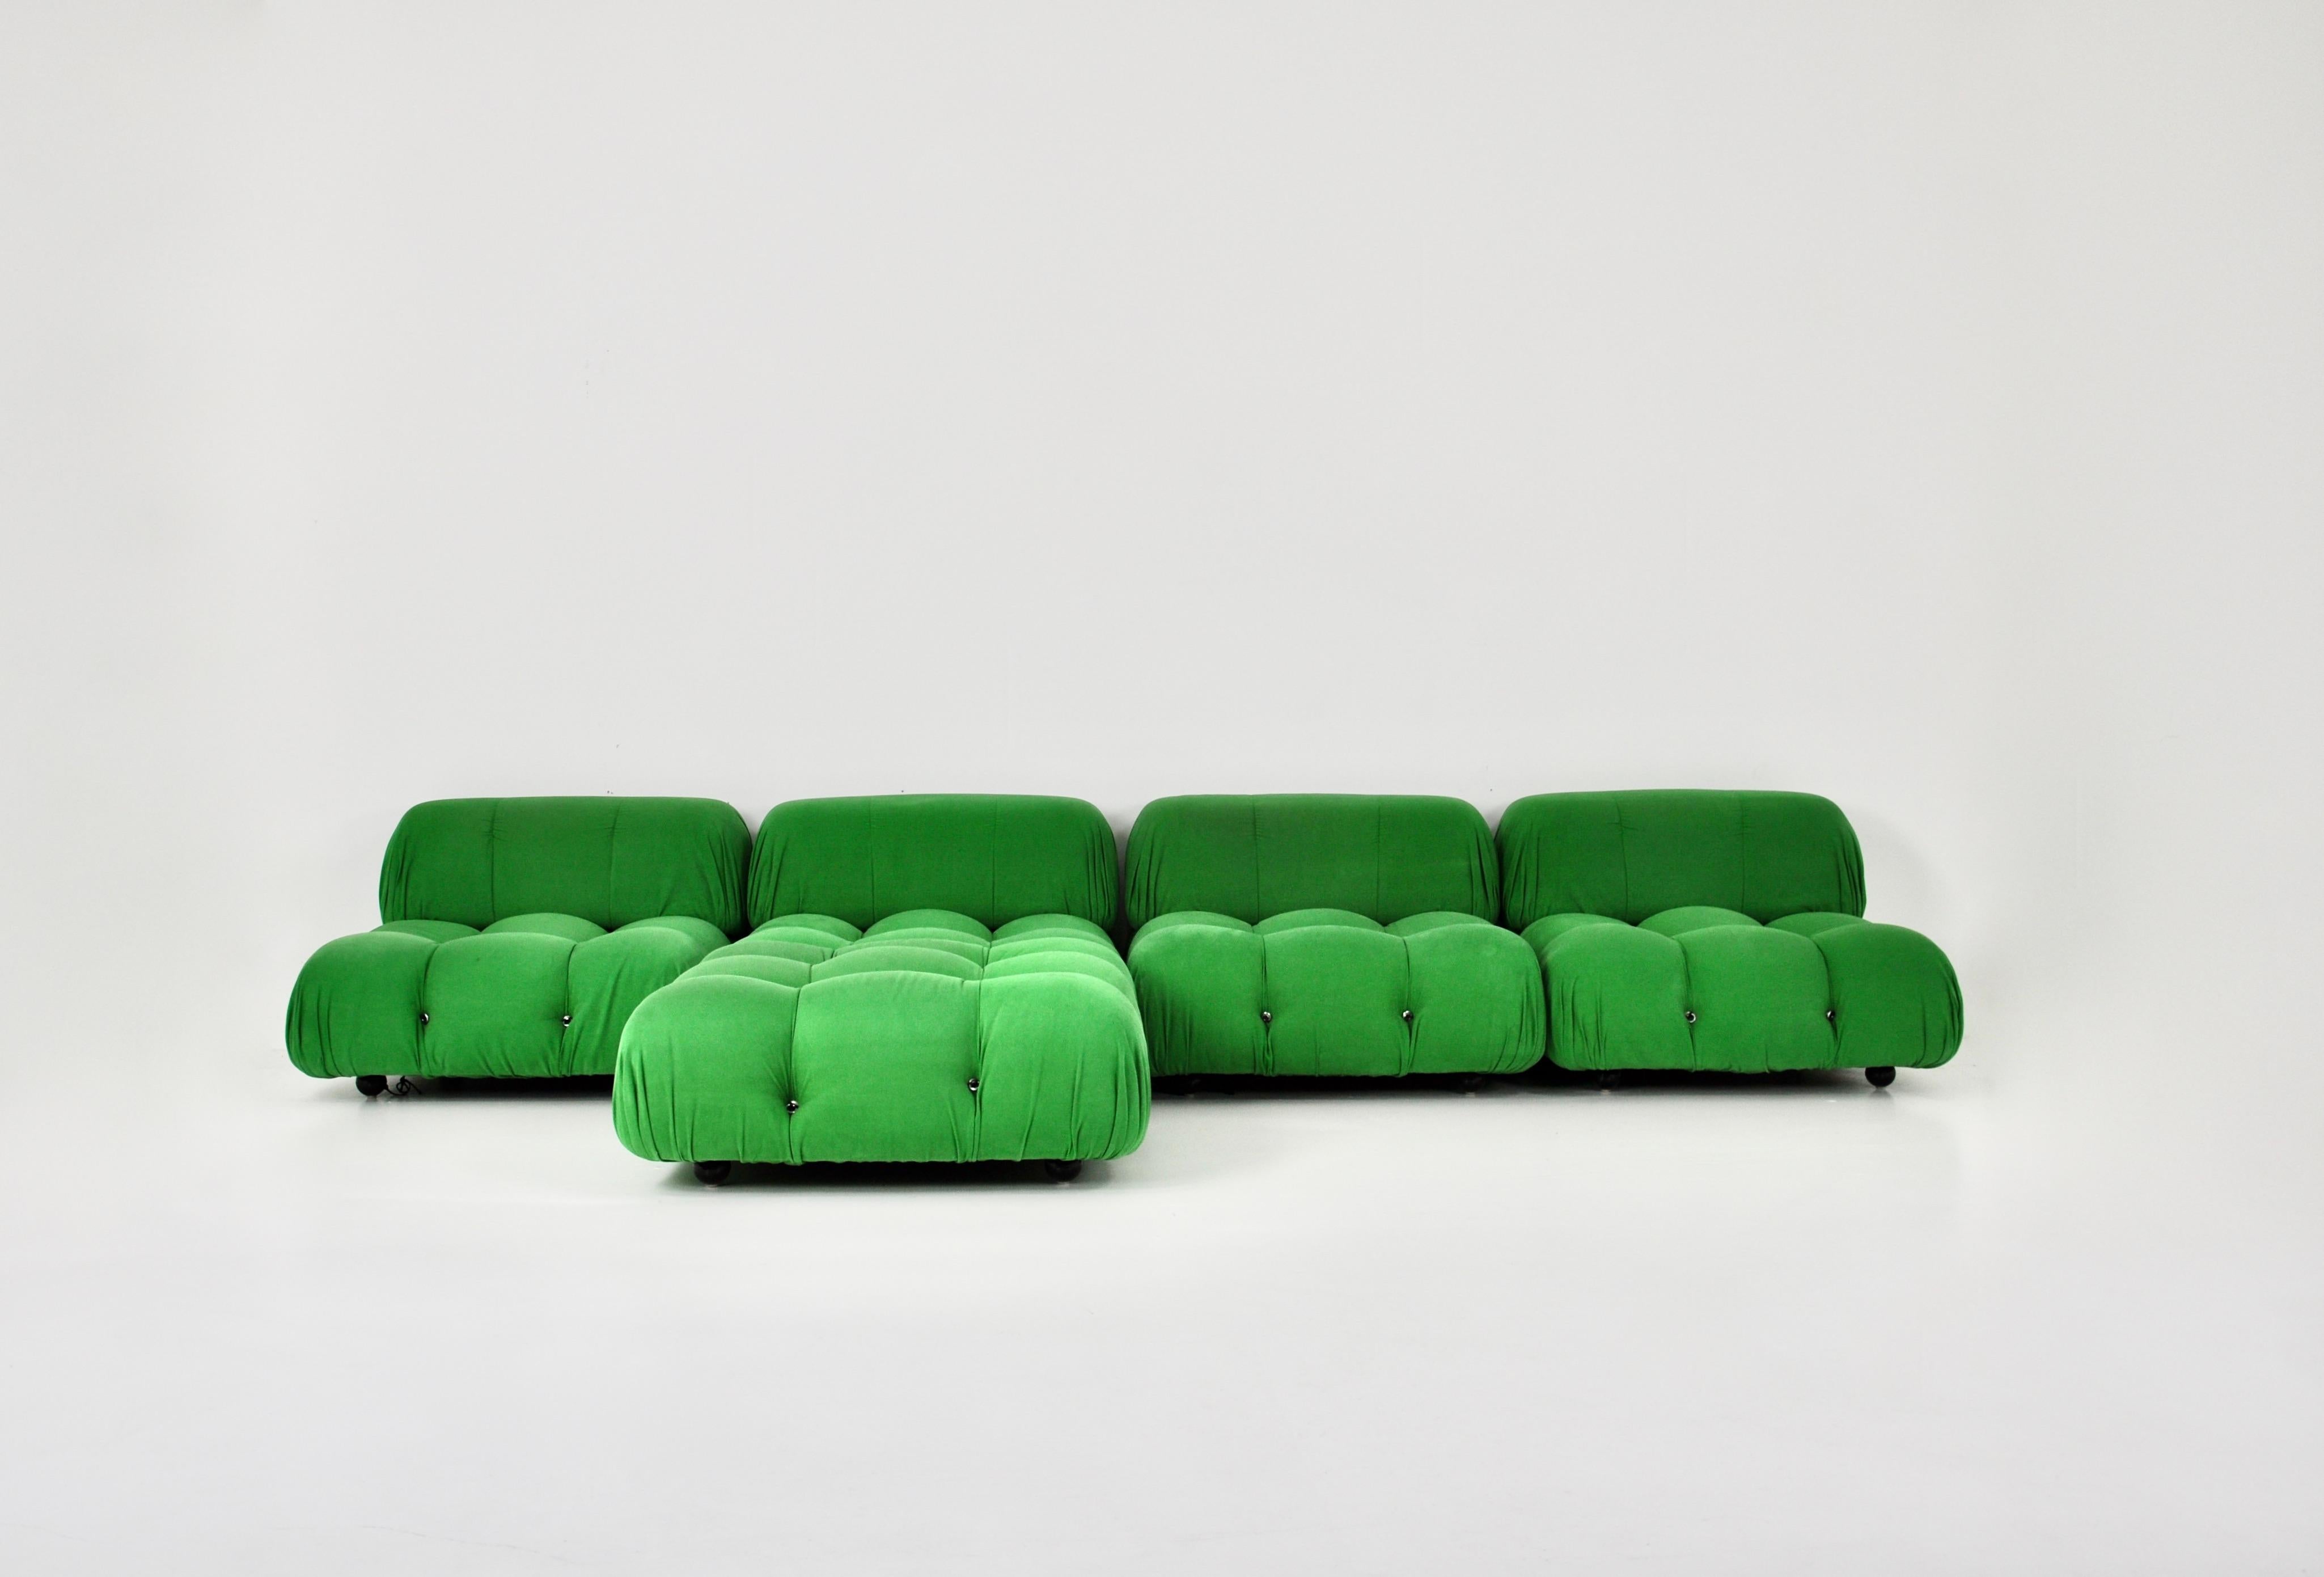 Sofa in green fabric. There are 4 large pieces and an ottoman. Seat height: 35 cm. Dimensions of one piece: H: 65 cm W: 93 cm D: 93 cm
Dimensions of the ottoman : H : 35 cm W : 93 cm D : 93 cm.
Modular as you like.
Stamped B&B Italia.
Wear due to